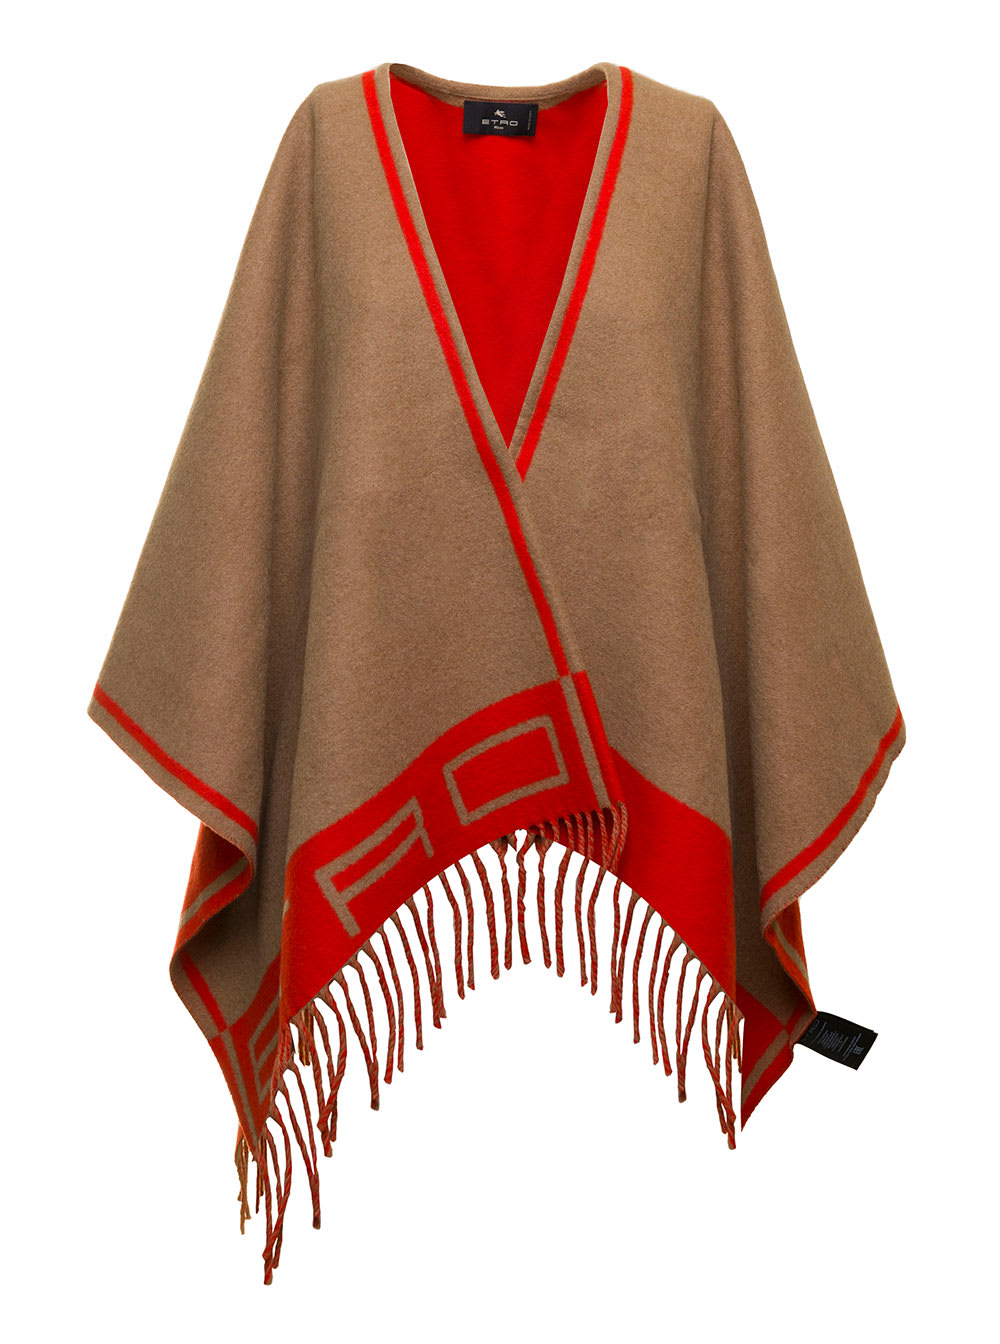 Etro Cape With Double Face Logo In Wool And Cashmere Blend Beige And Orange Woman